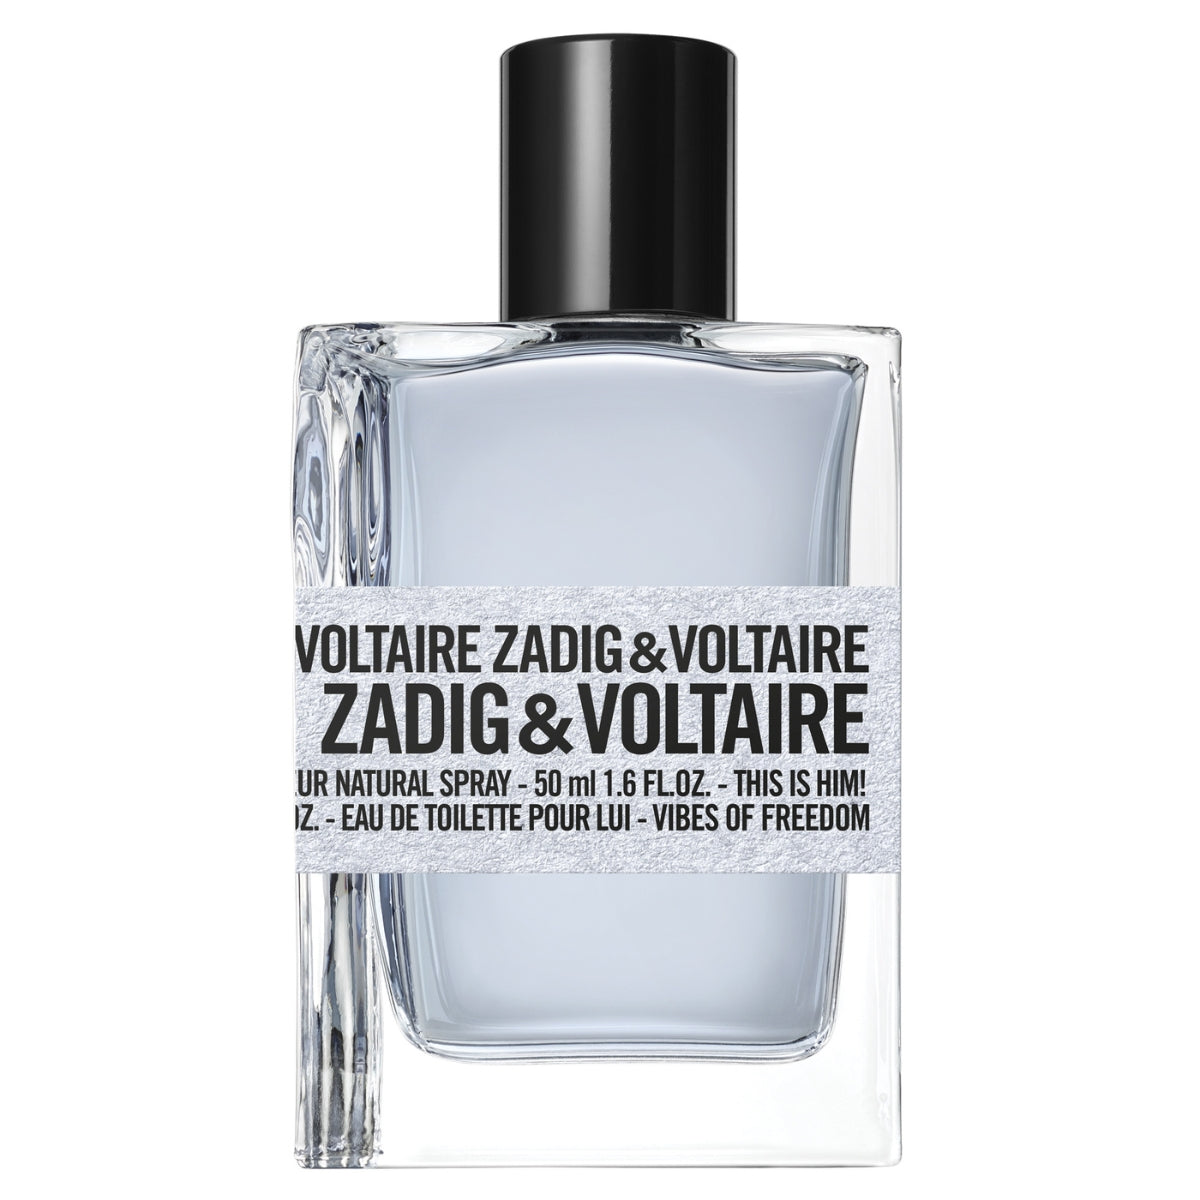 Zadig&Voltaire This is Him Vibes of Freedom Eau De Toilette